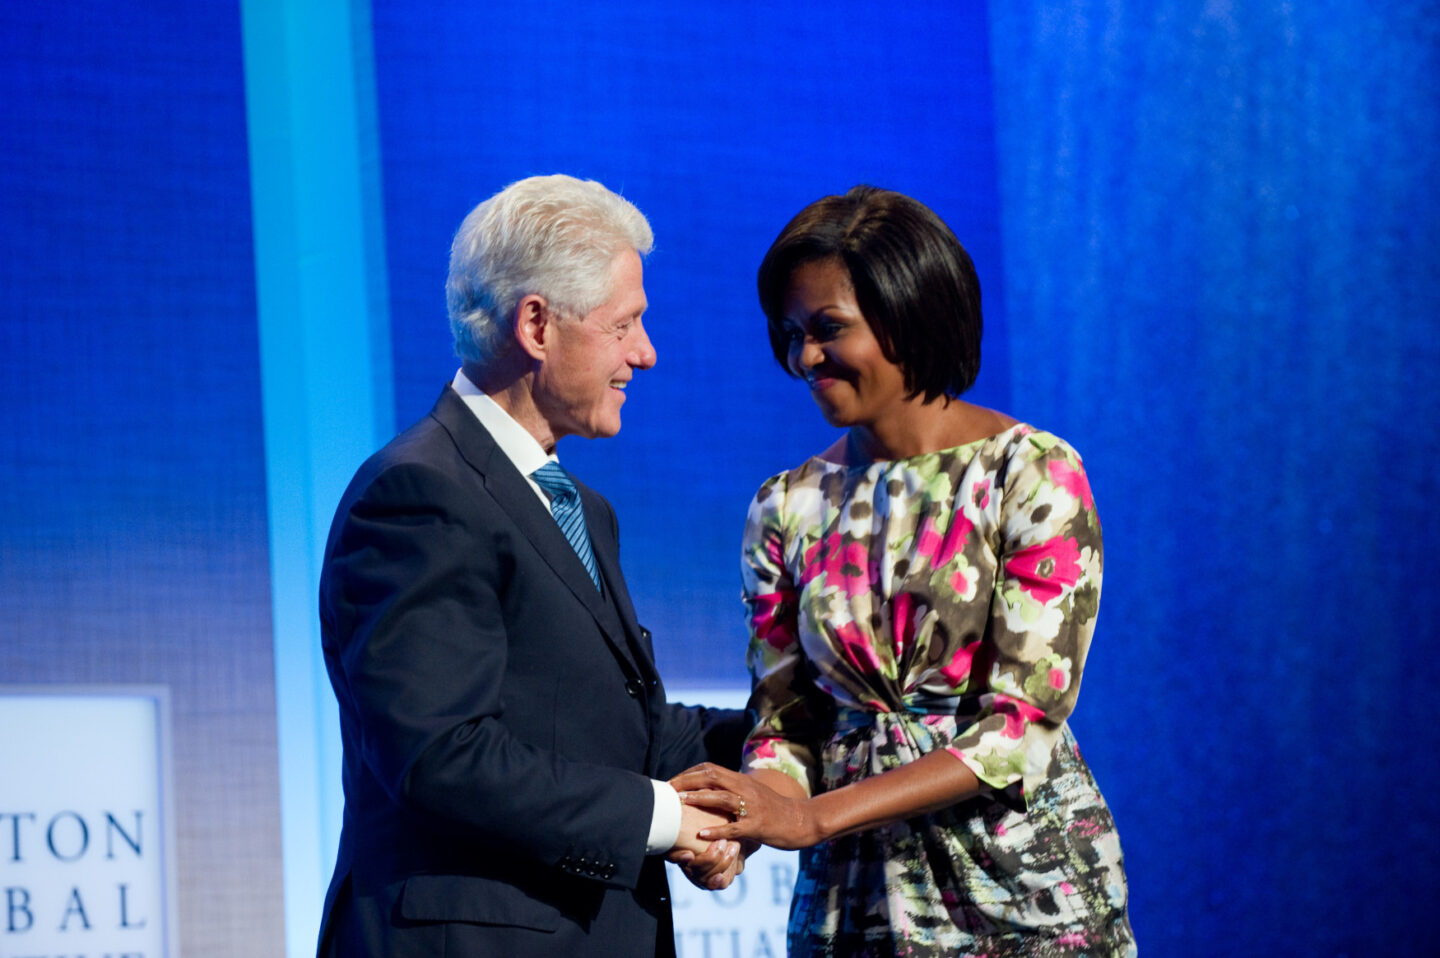 President Clinton and Michelle Obama shake hands on stage